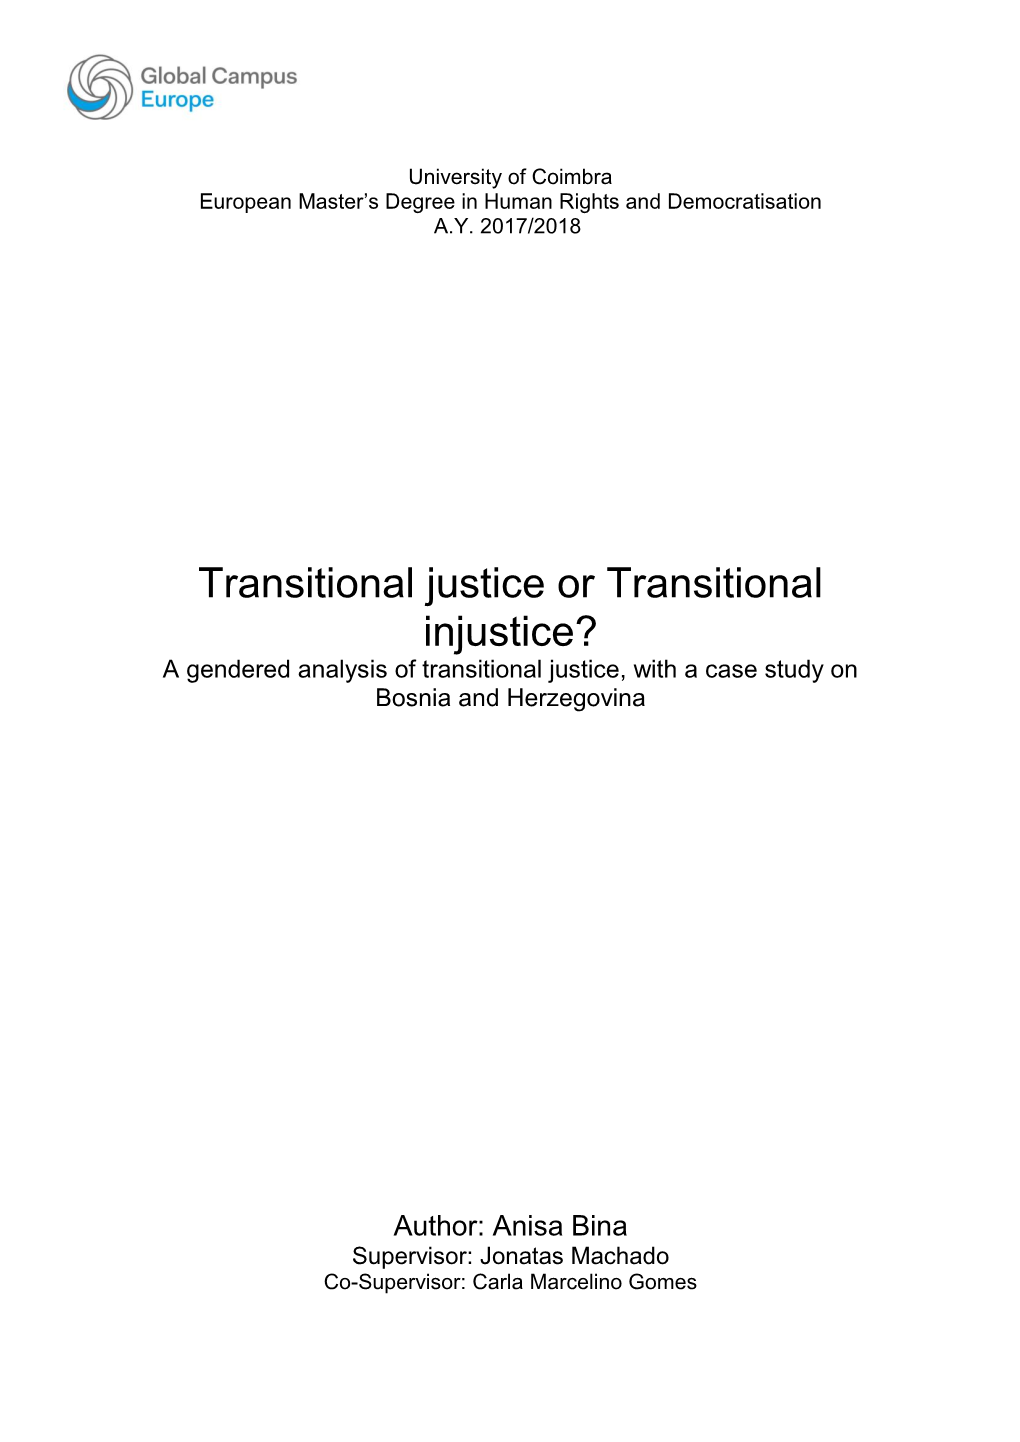 Transitional Justice Or Transitional Injustice? a Gendered Analysis of Transitional Justice, with a Case Study on Bosnia and Herzegovina